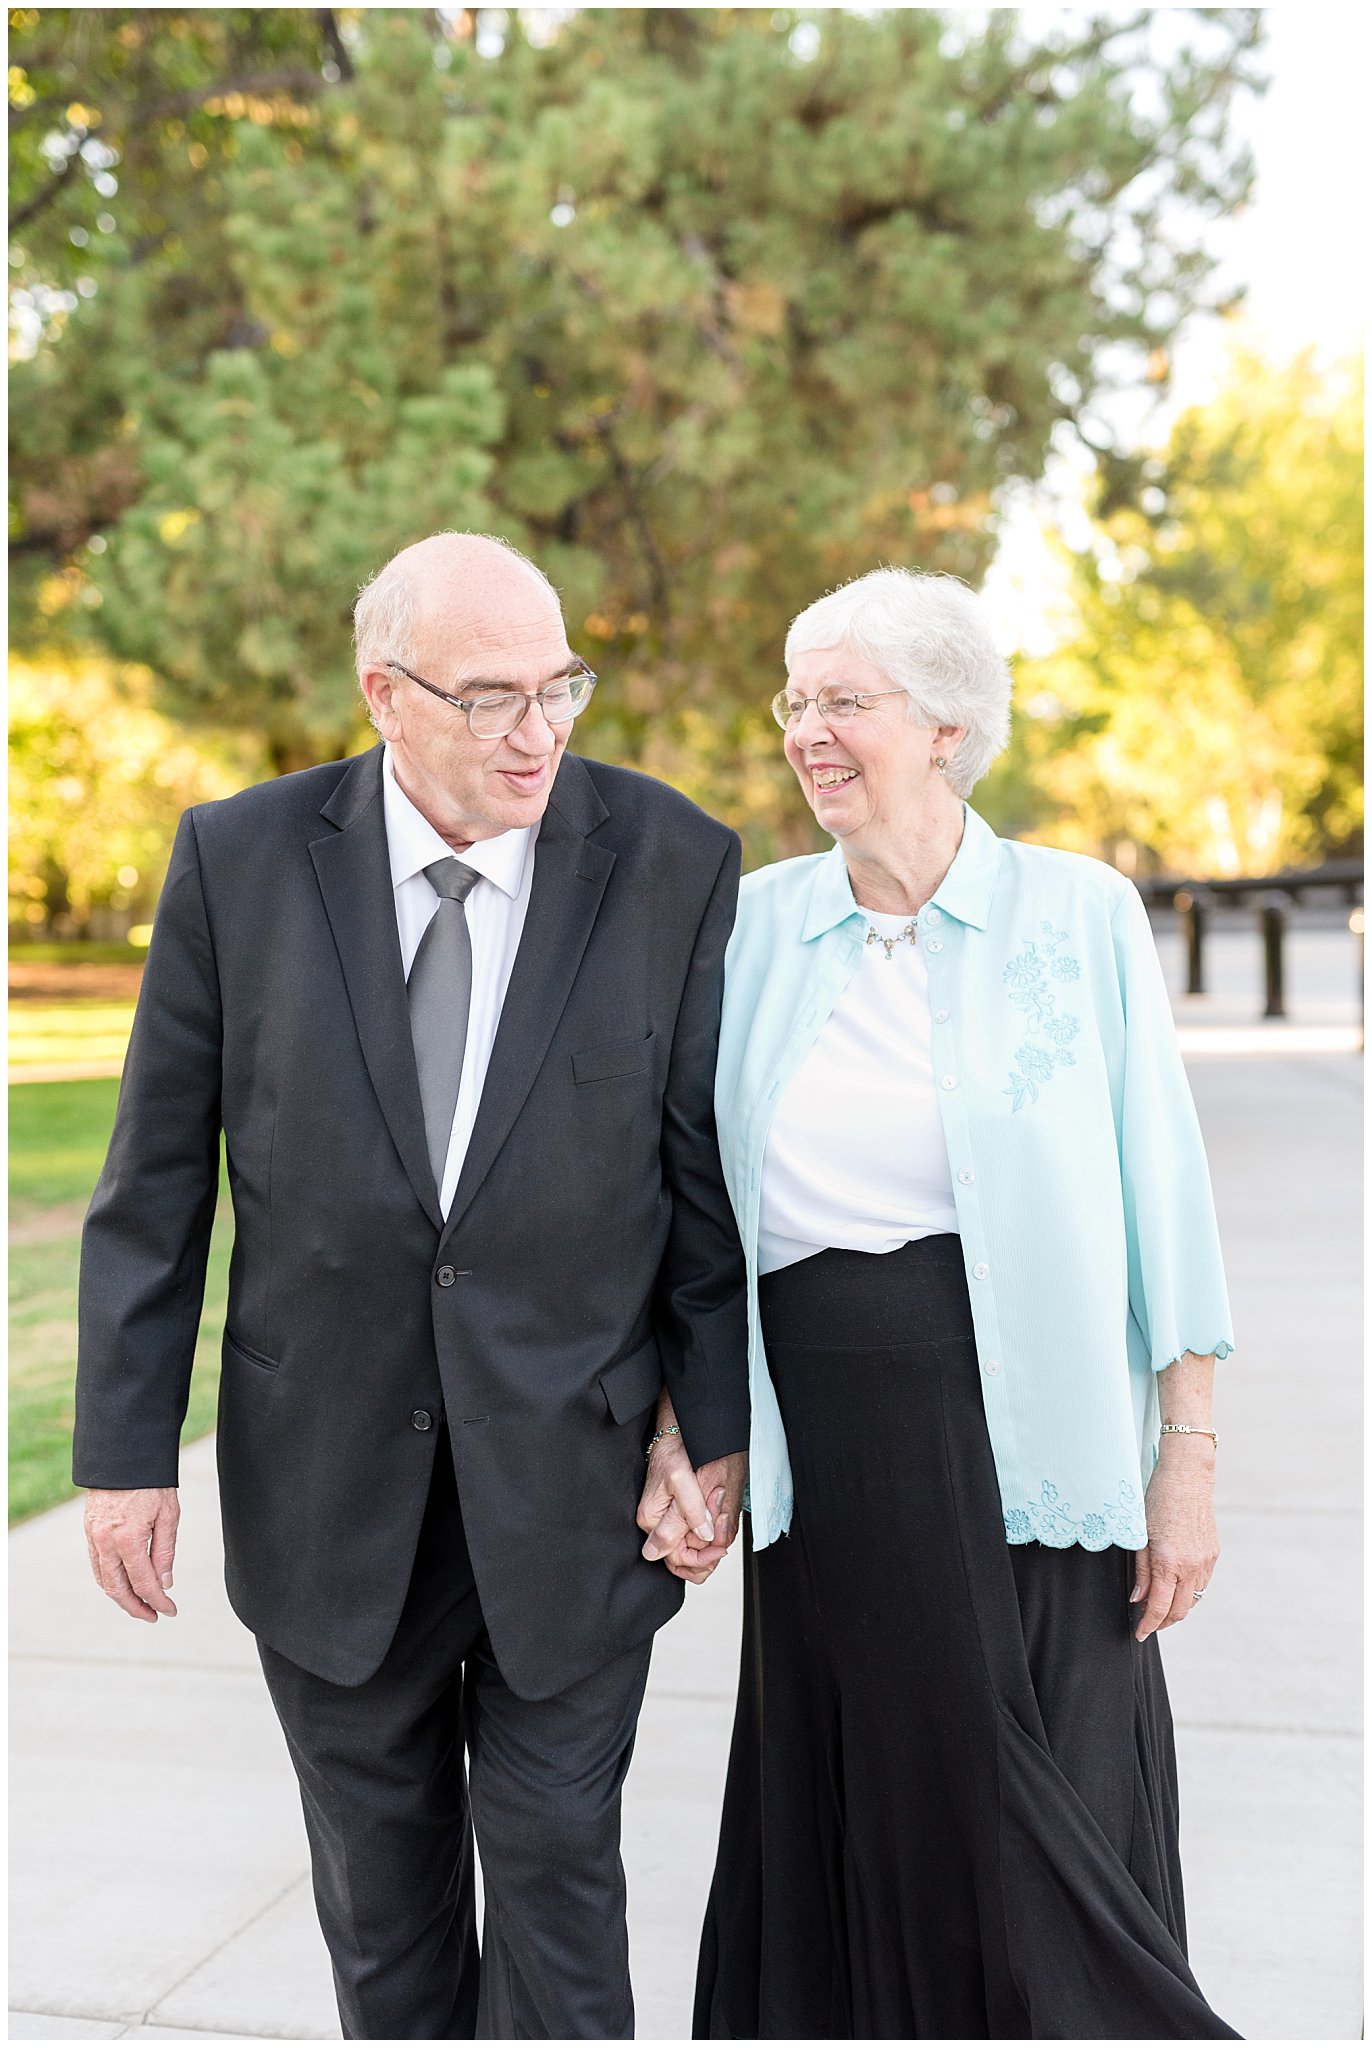 Grandparents walking and laughing | Layton Commons Park | Layton Couples Photographer | Jessie and Dallin